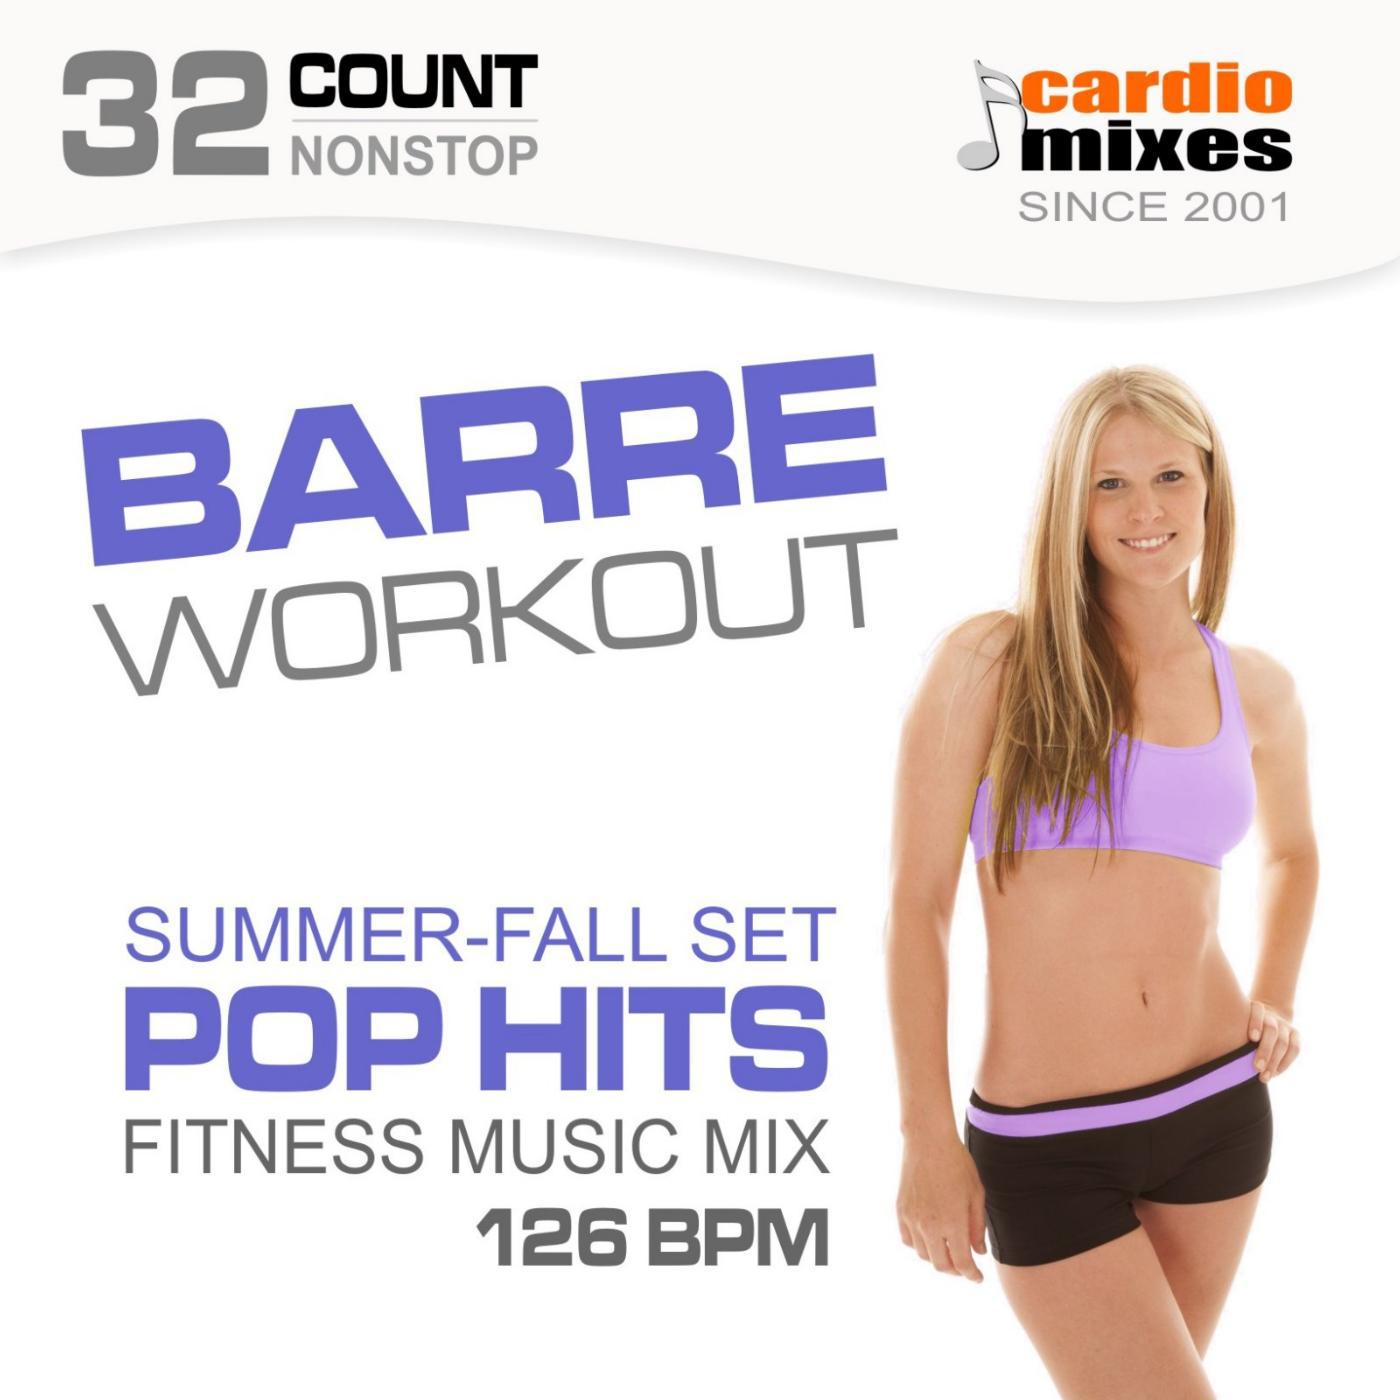 Постер альбома Barre Workout 2015, Pop Hits, Summer & Fall Fitness Music Mix (126 BPM, 32-Count, Nonstop)